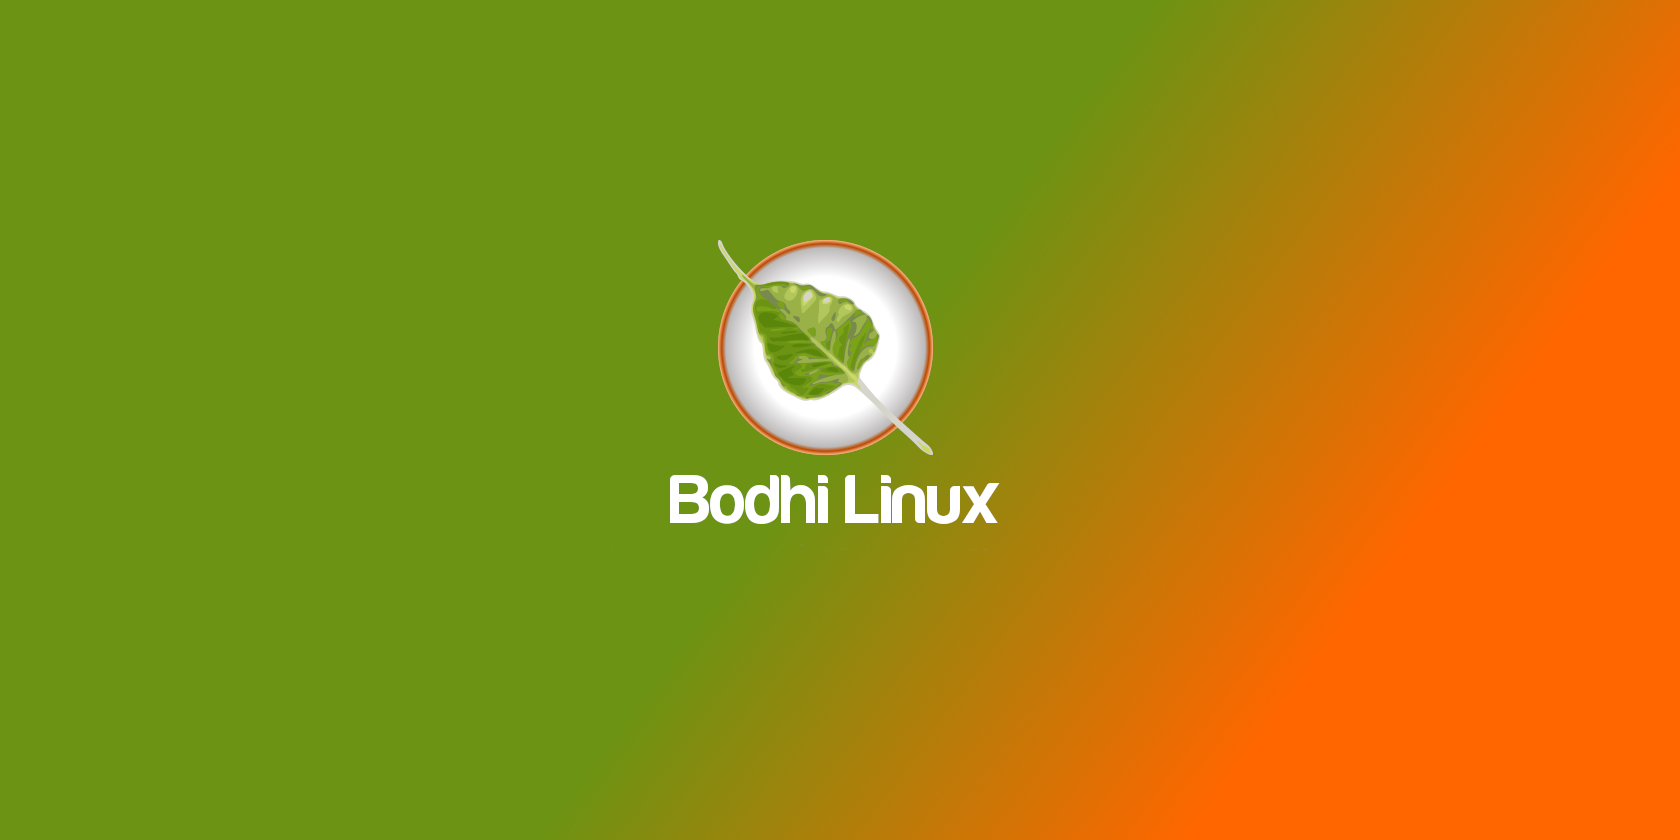 Bodhi Linux Logo and Name Over Green and Orange Background